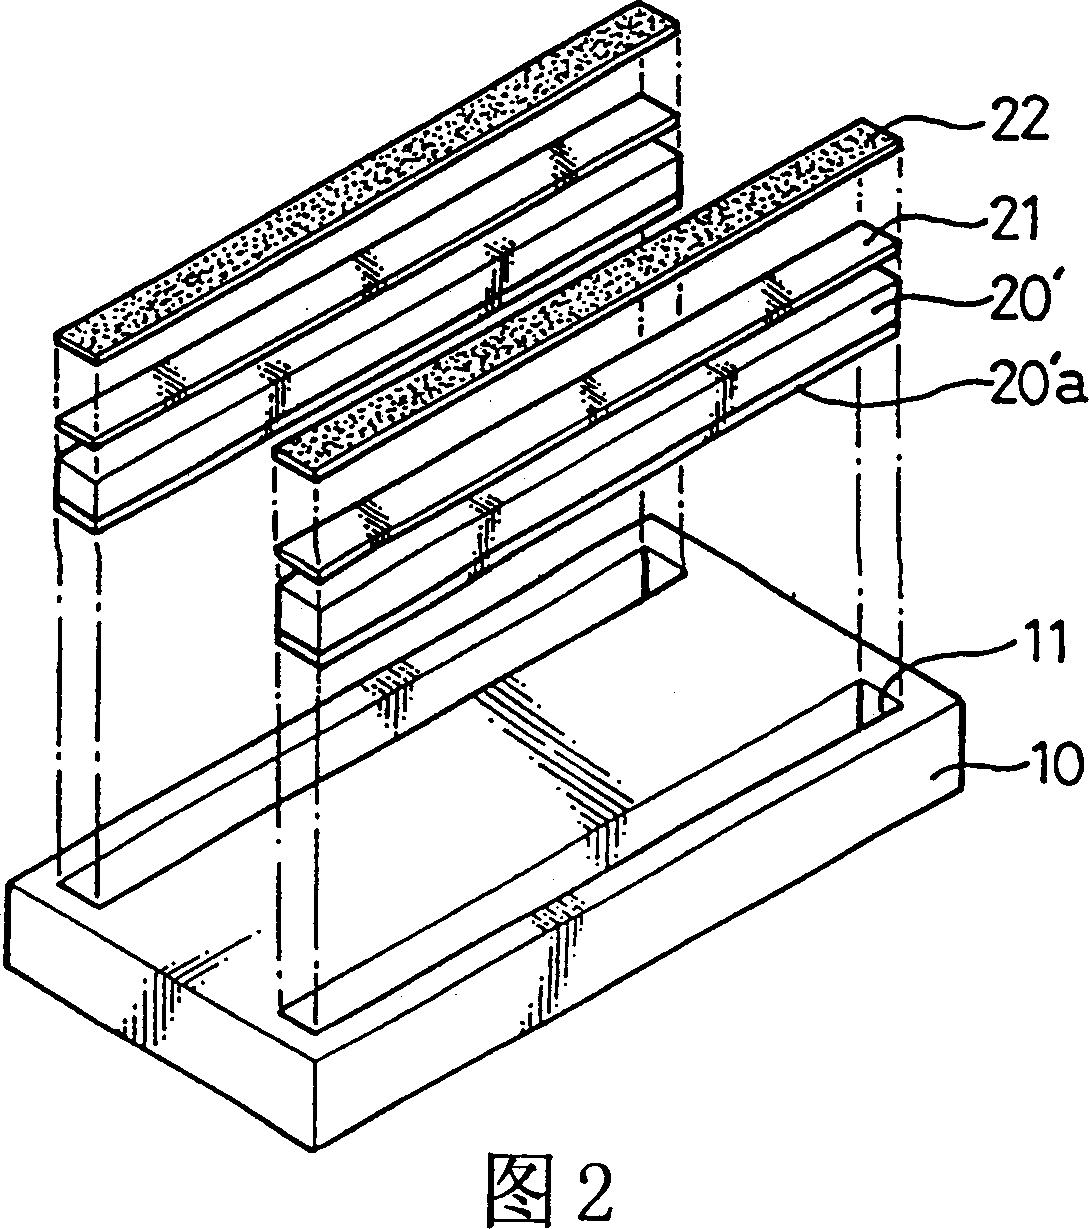 Method for embedding fastening piece to seat cushion